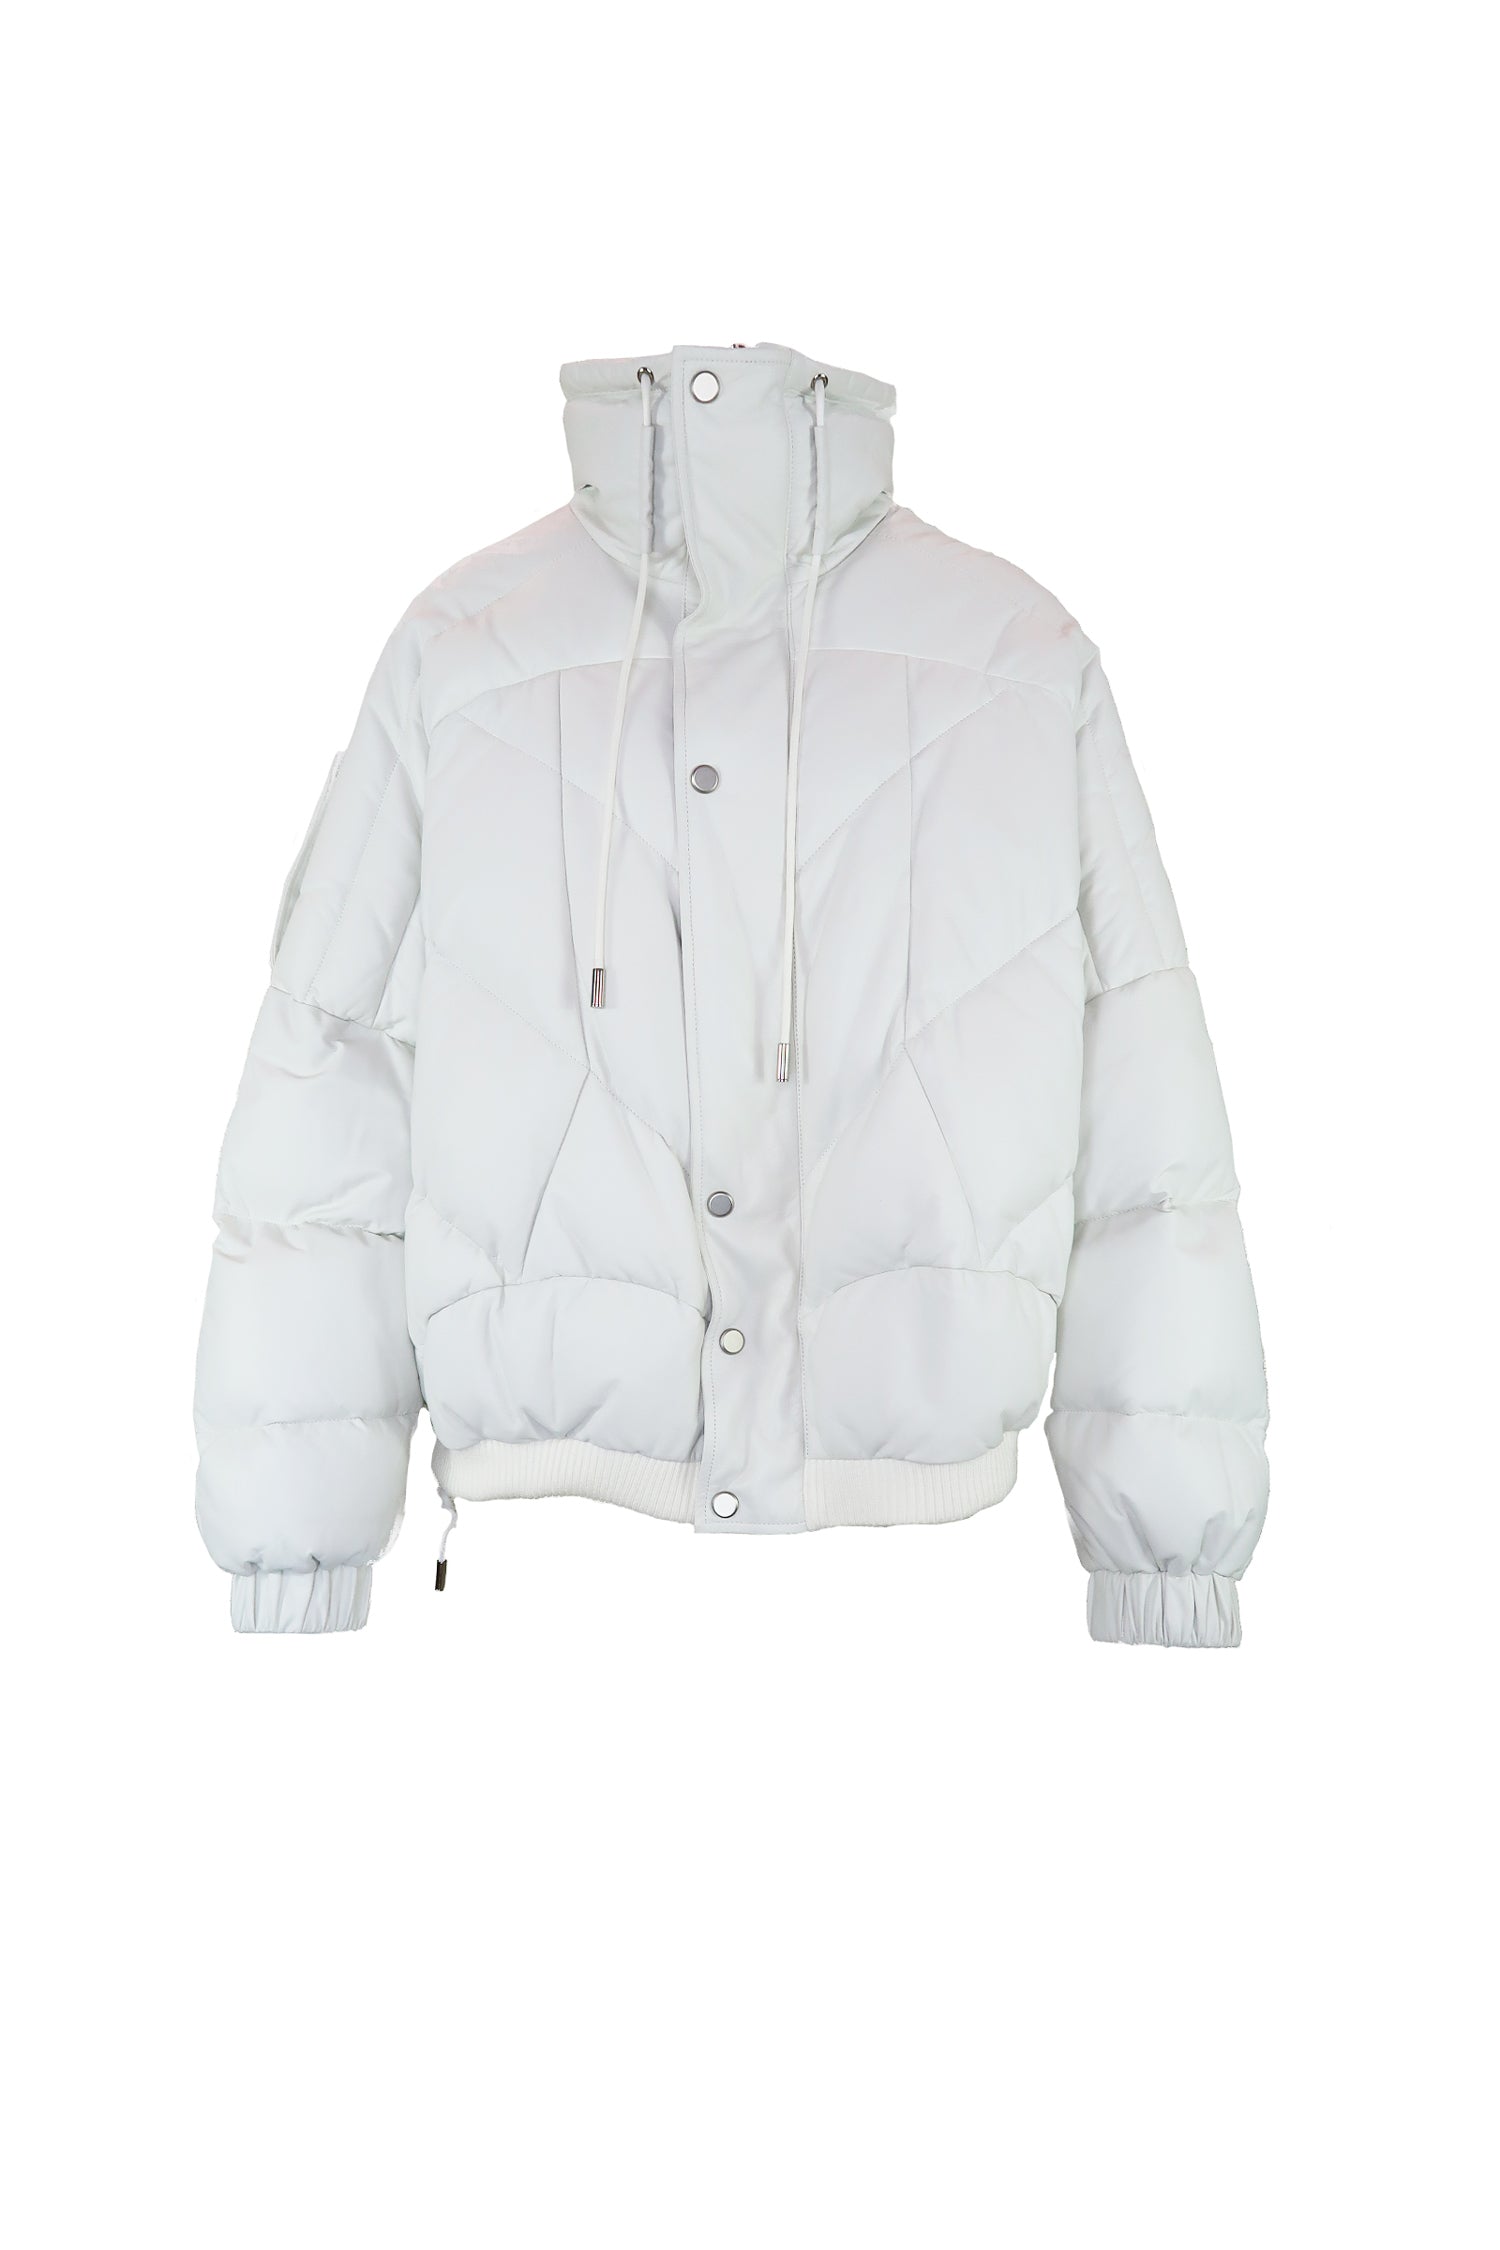 Berlin Leather Puffer in Chalk - Mode & Affaire